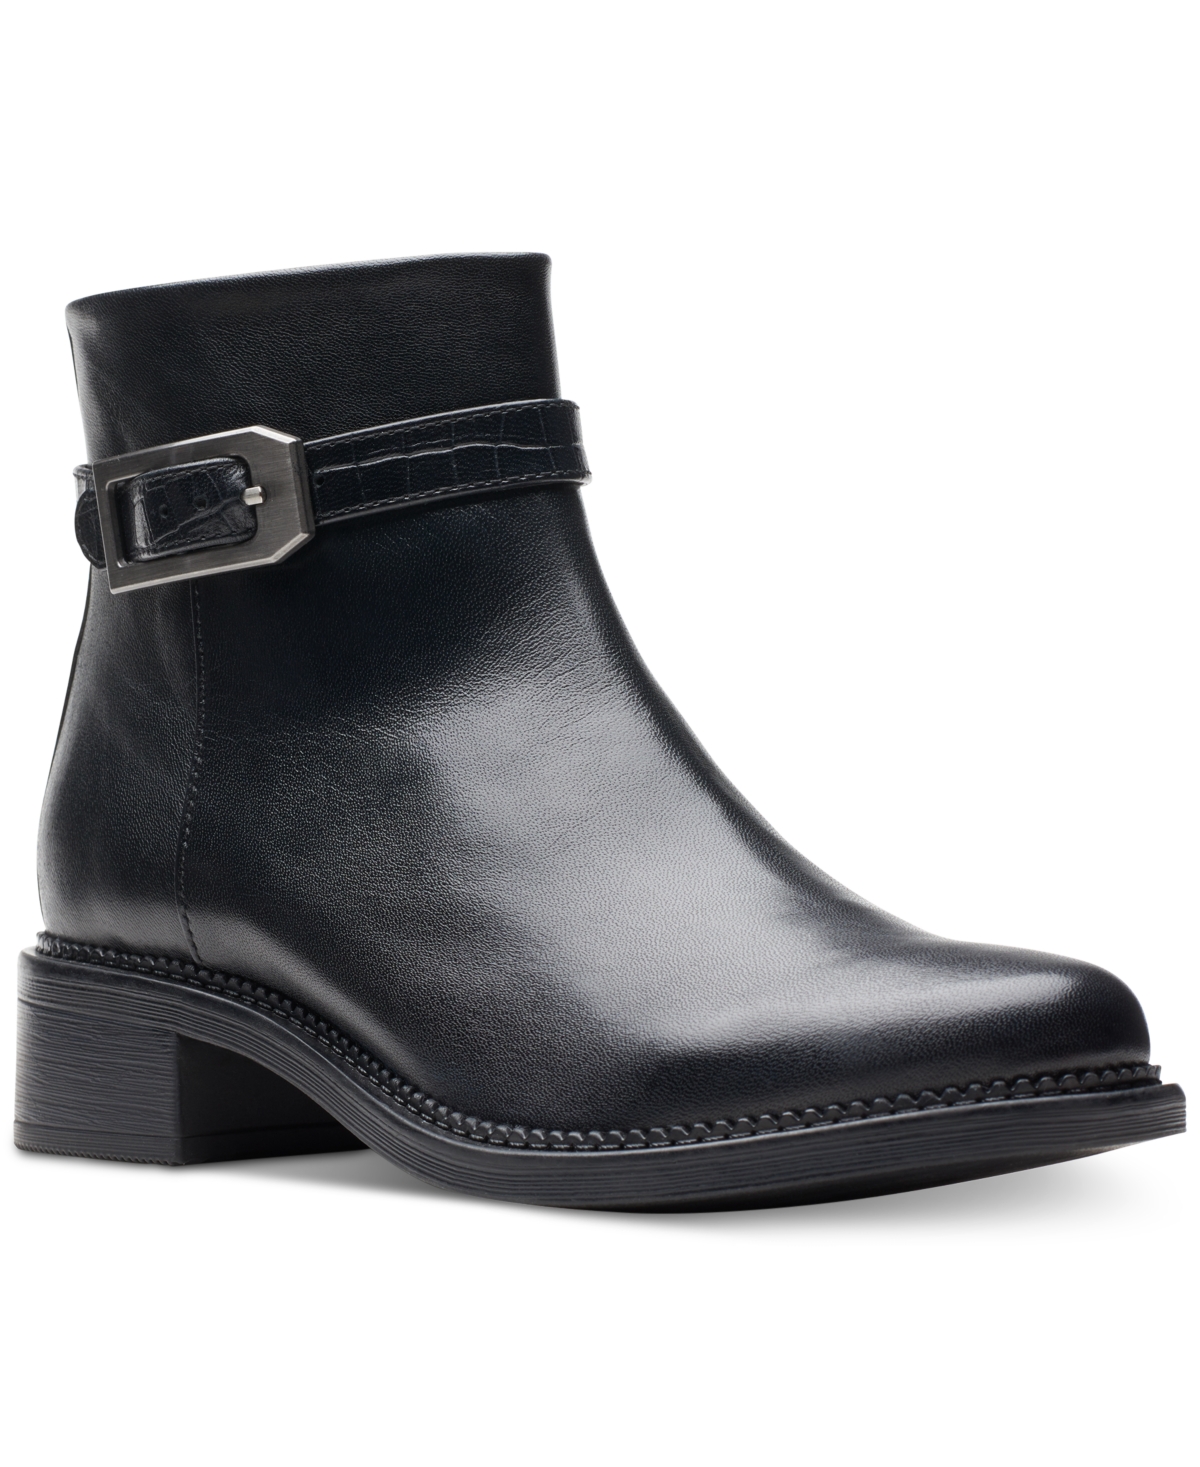 Clarks Women's Carleigh Dalia Buckled Ankle Booties In Black Leather